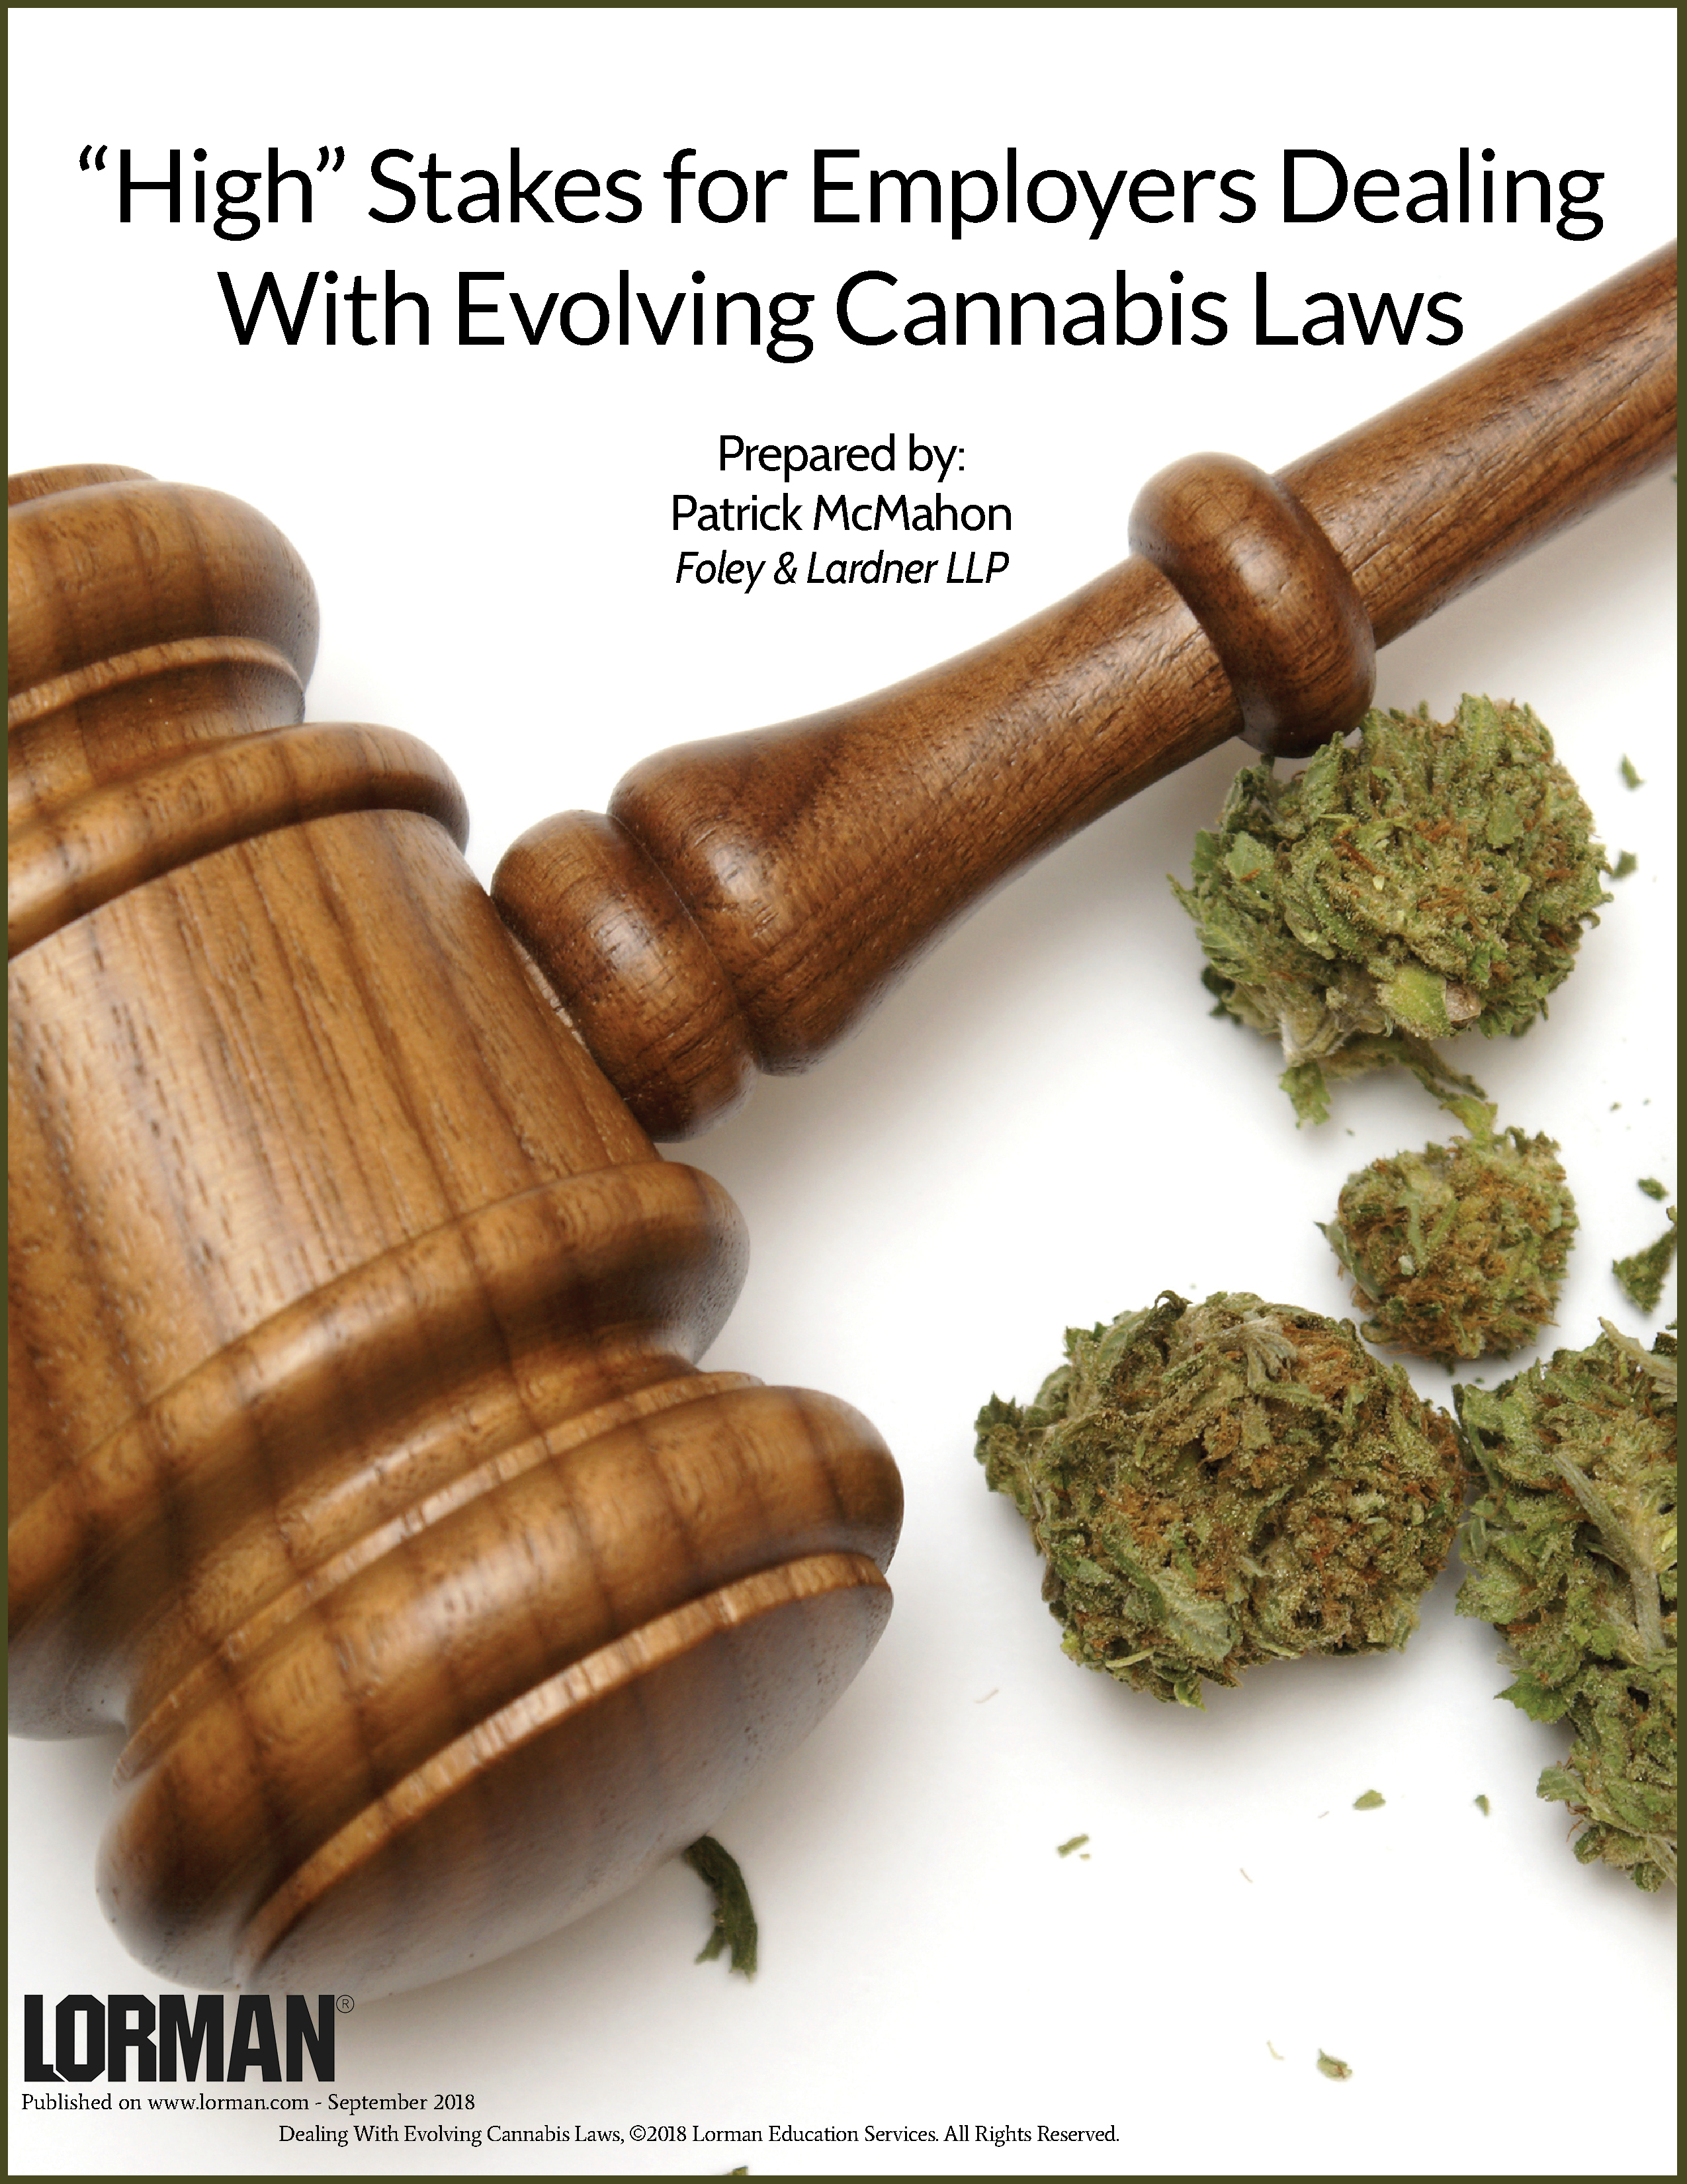 “High” Stakes for Employers Dealing With Evolving Cannabis Laws